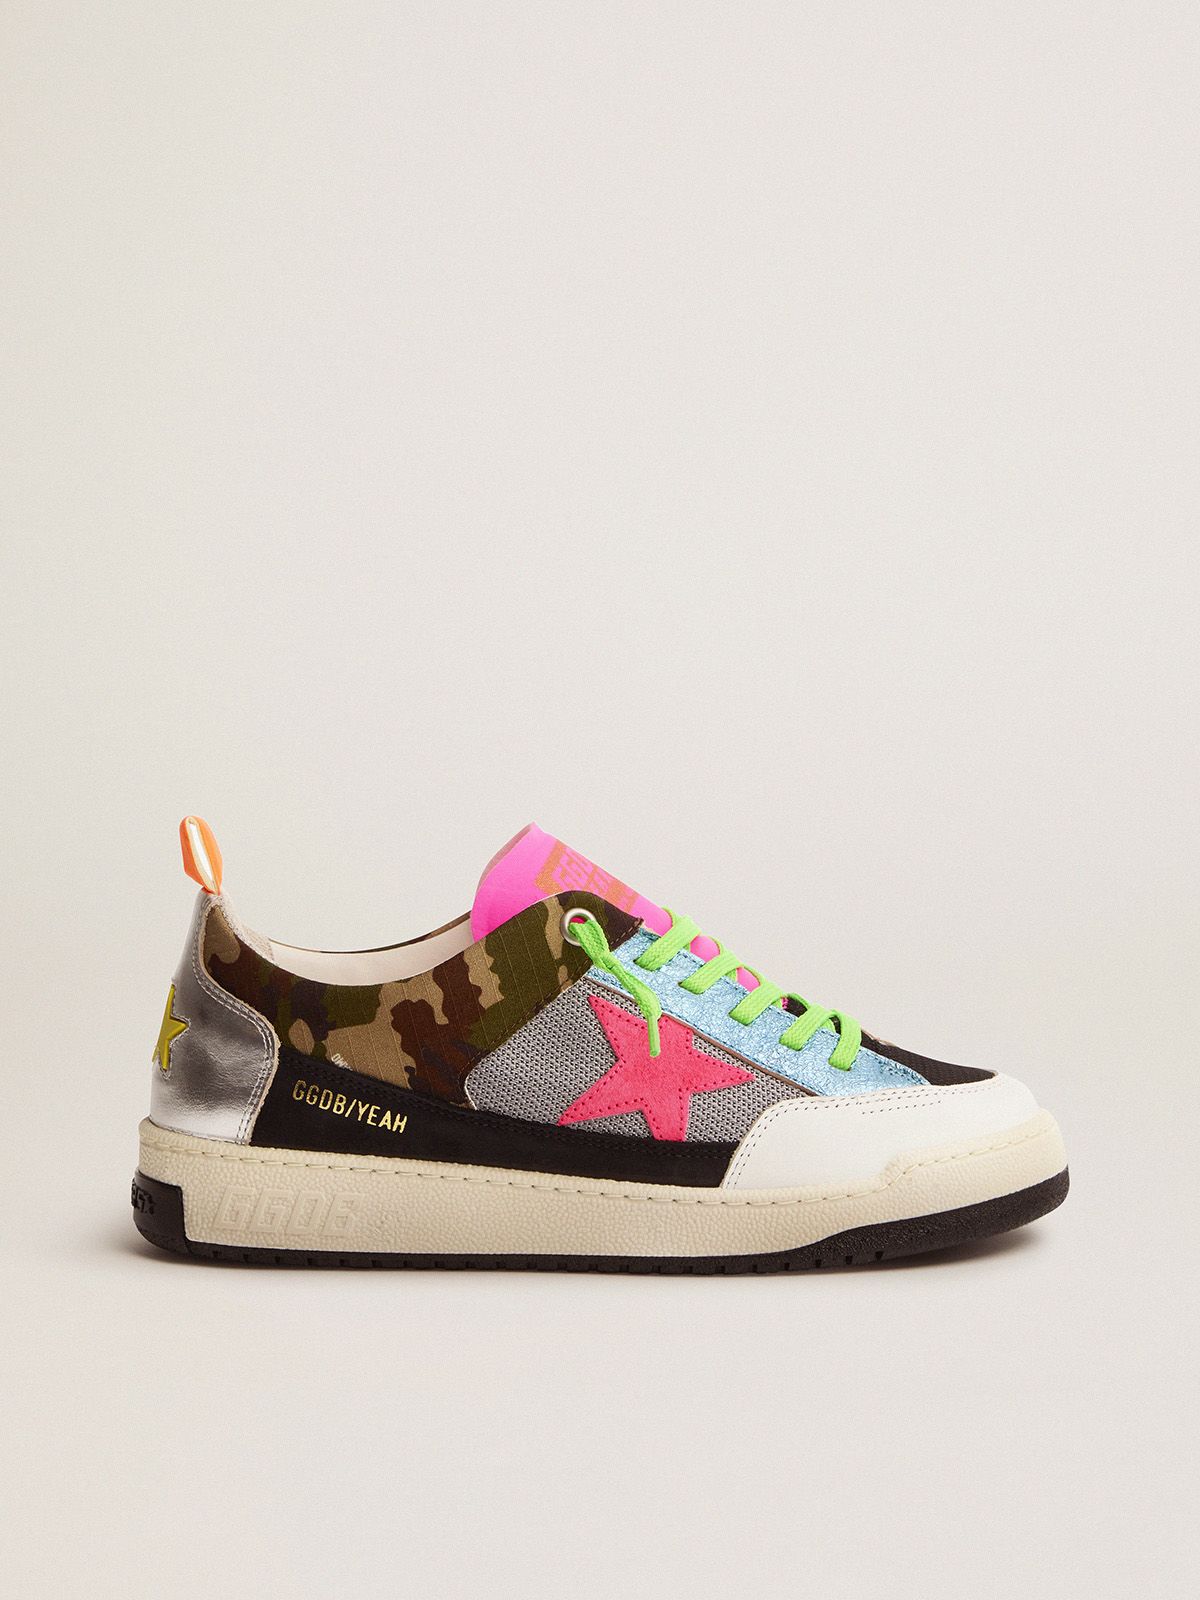 golden goose with sneakers Women’s camouflage Yeah star fuchsia